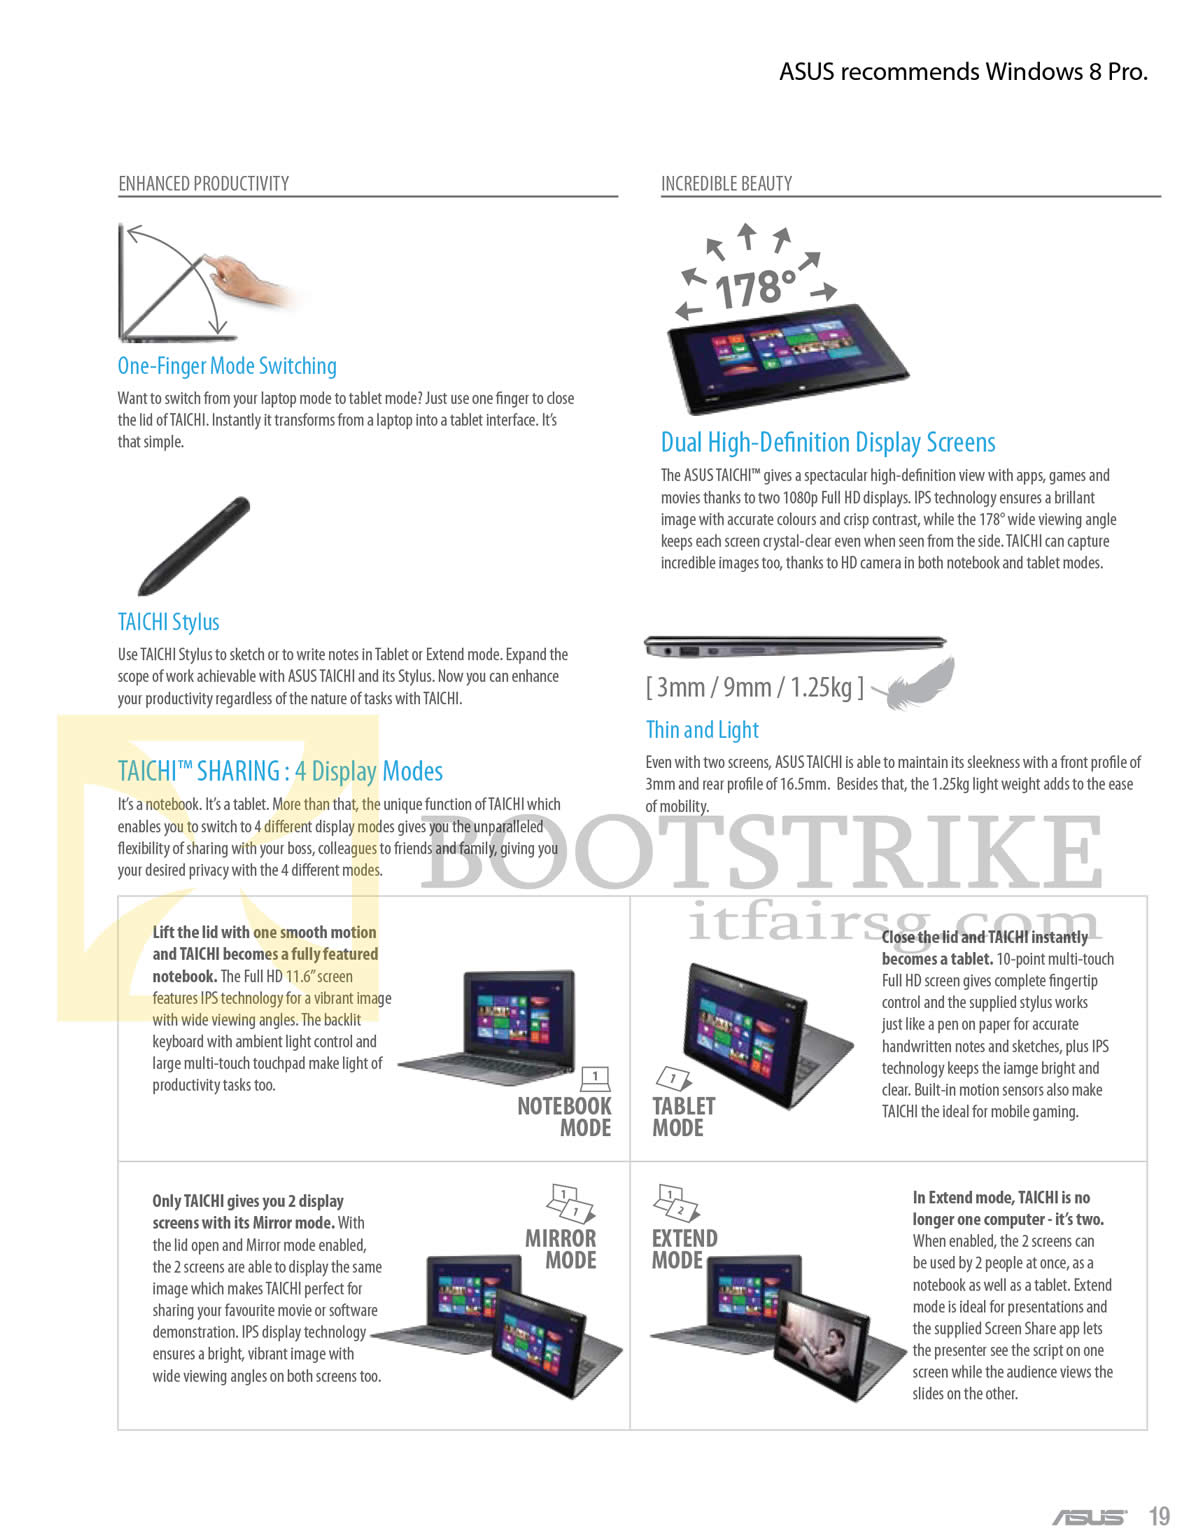 PC SHOW 2013 price list image brochure of ASUS Notebooks Taichi Features, Stylus, 4 Display Modes